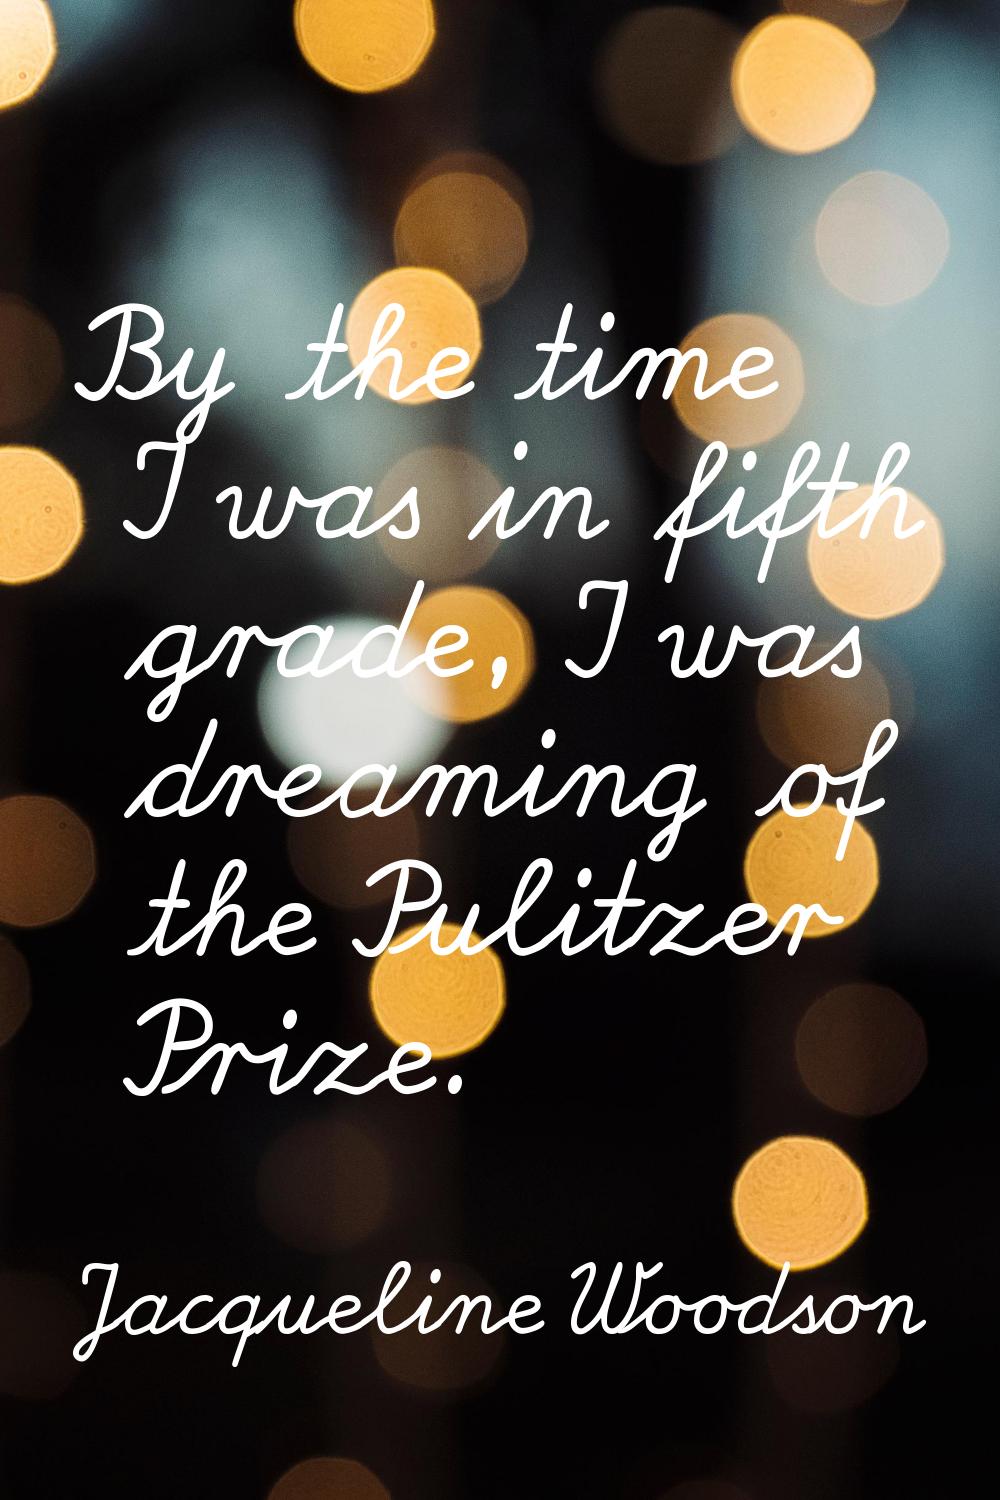 By the time I was in fifth grade, I was dreaming of the Pulitzer Prize.